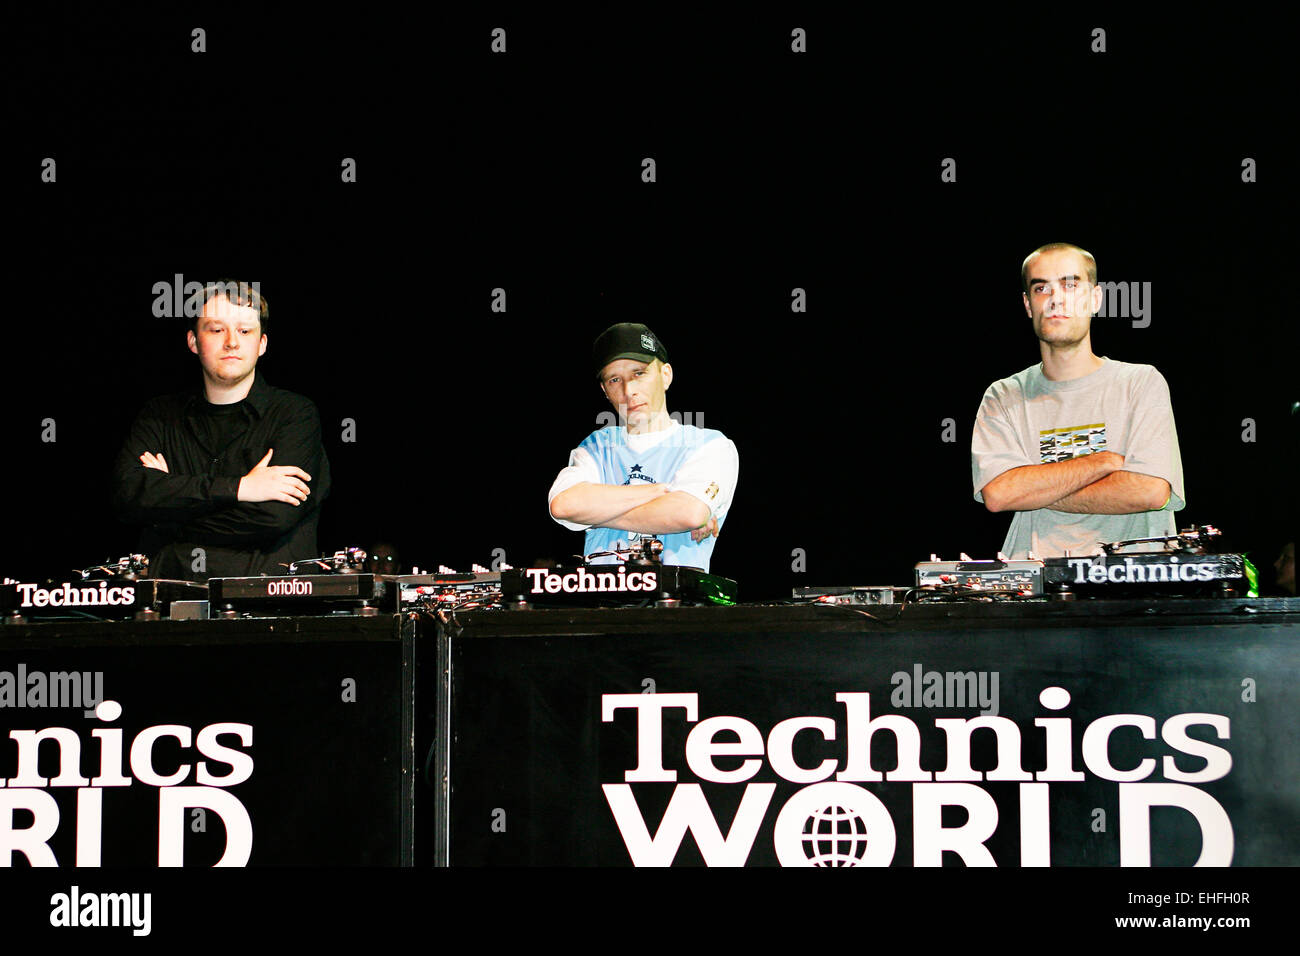 La Guilde from France DJing in the Team Championships at the DMC/Technics World DJ Championships at Hammersmith Apollo. Stock Photo